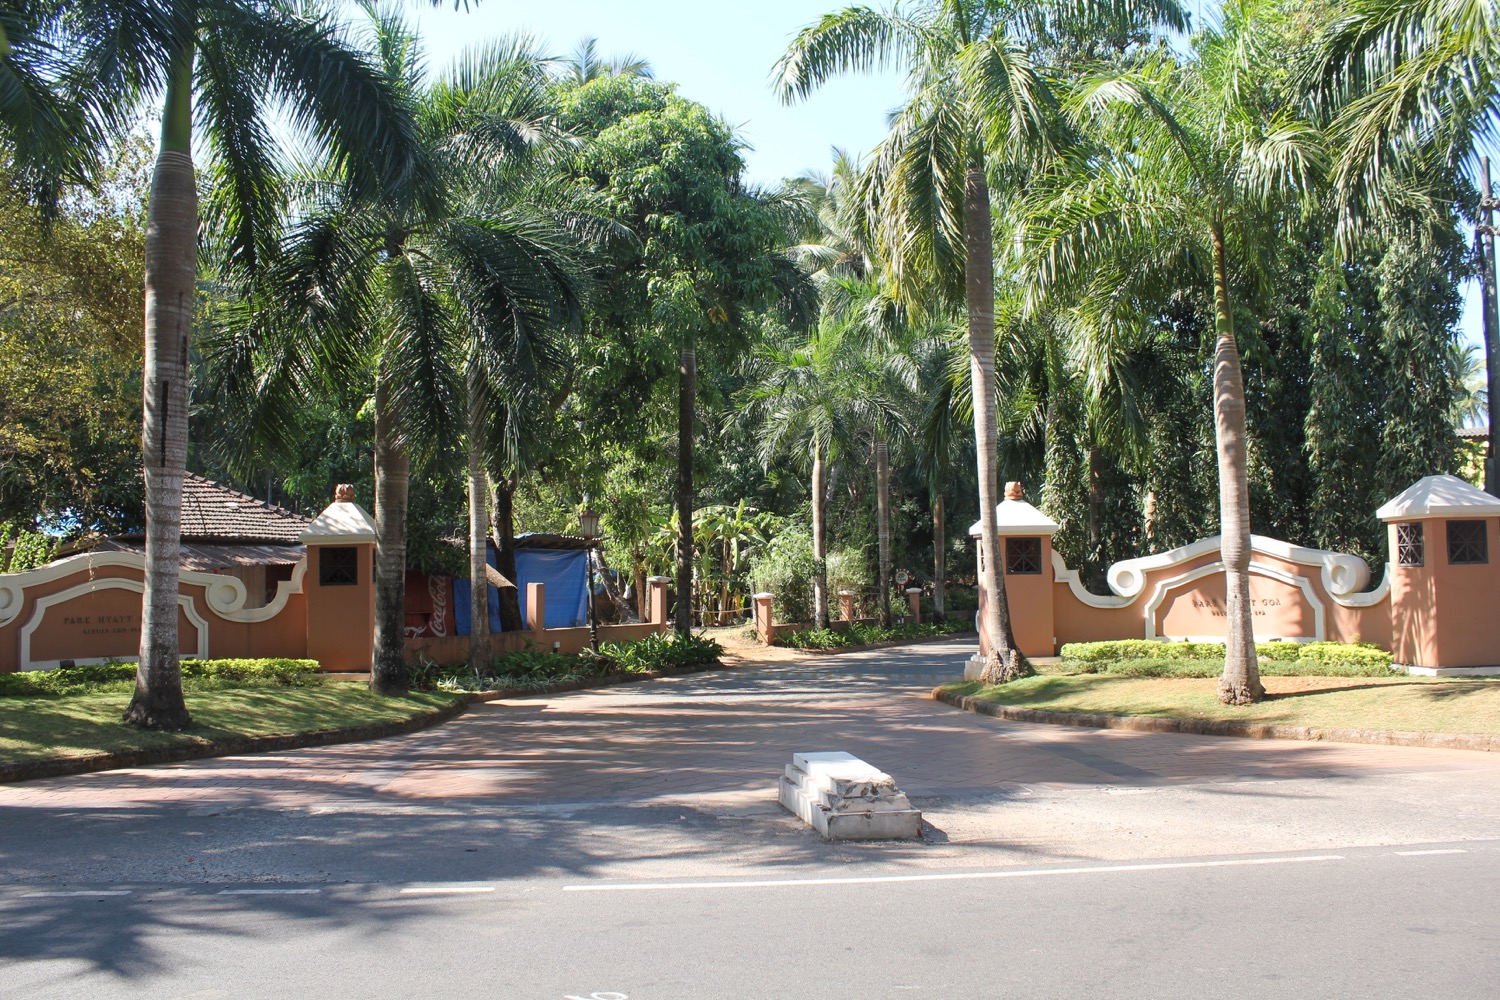 a road with palm trees and a house